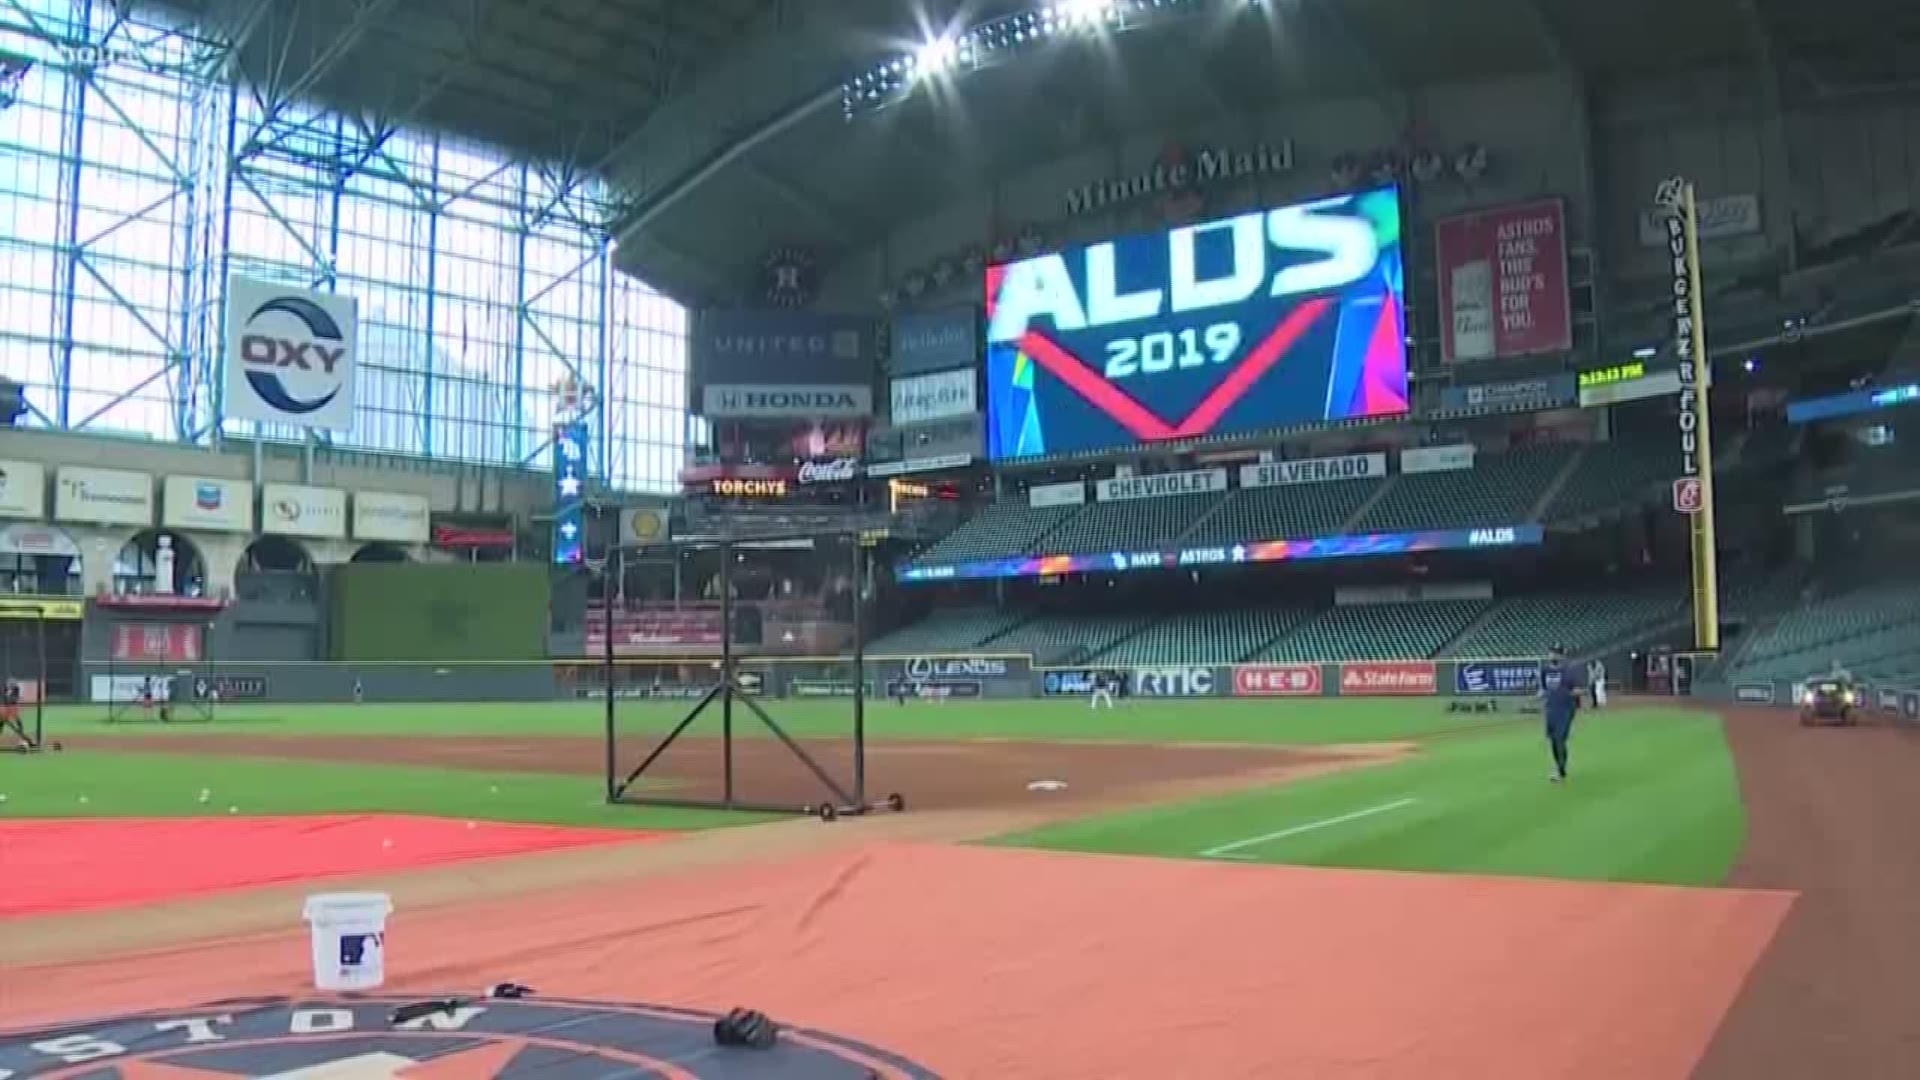 The Astros weren't able to close out the ALCS in Game 5 so it's back to Houston where the 'Stros plan to clinch their spot in the World Series in either Game 6 or 7.